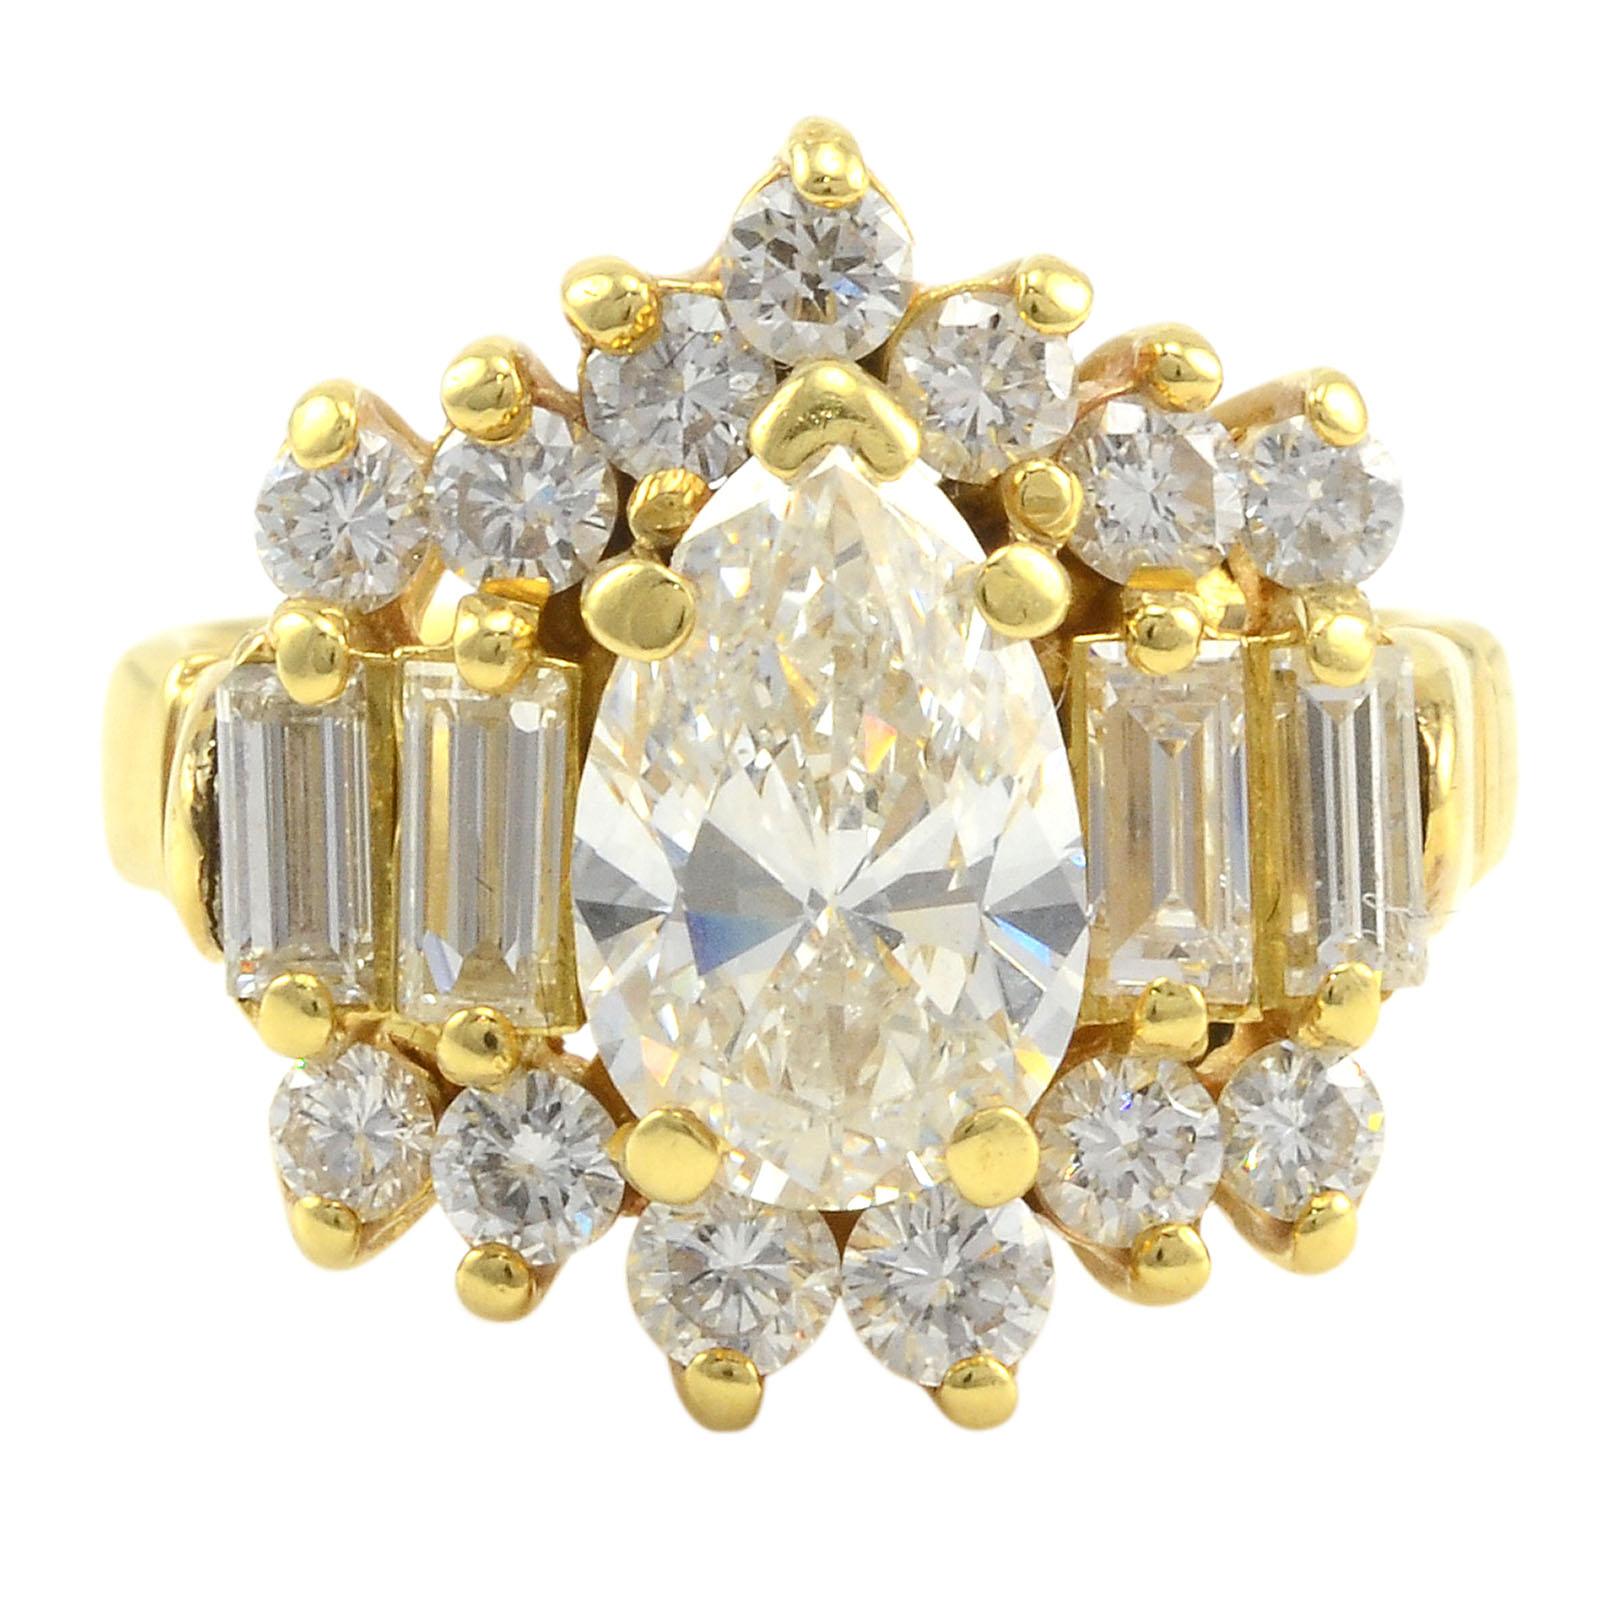 Estate 18 karat yellow gold 2.75 CTW multi diamond ring. This estate diamond ring has a center pear shaped diamond at 1.50 carats with VS2 clarity and H color, along with four baguette diamonds at 0.55 carat total weight and 13 diamonds at 0.70